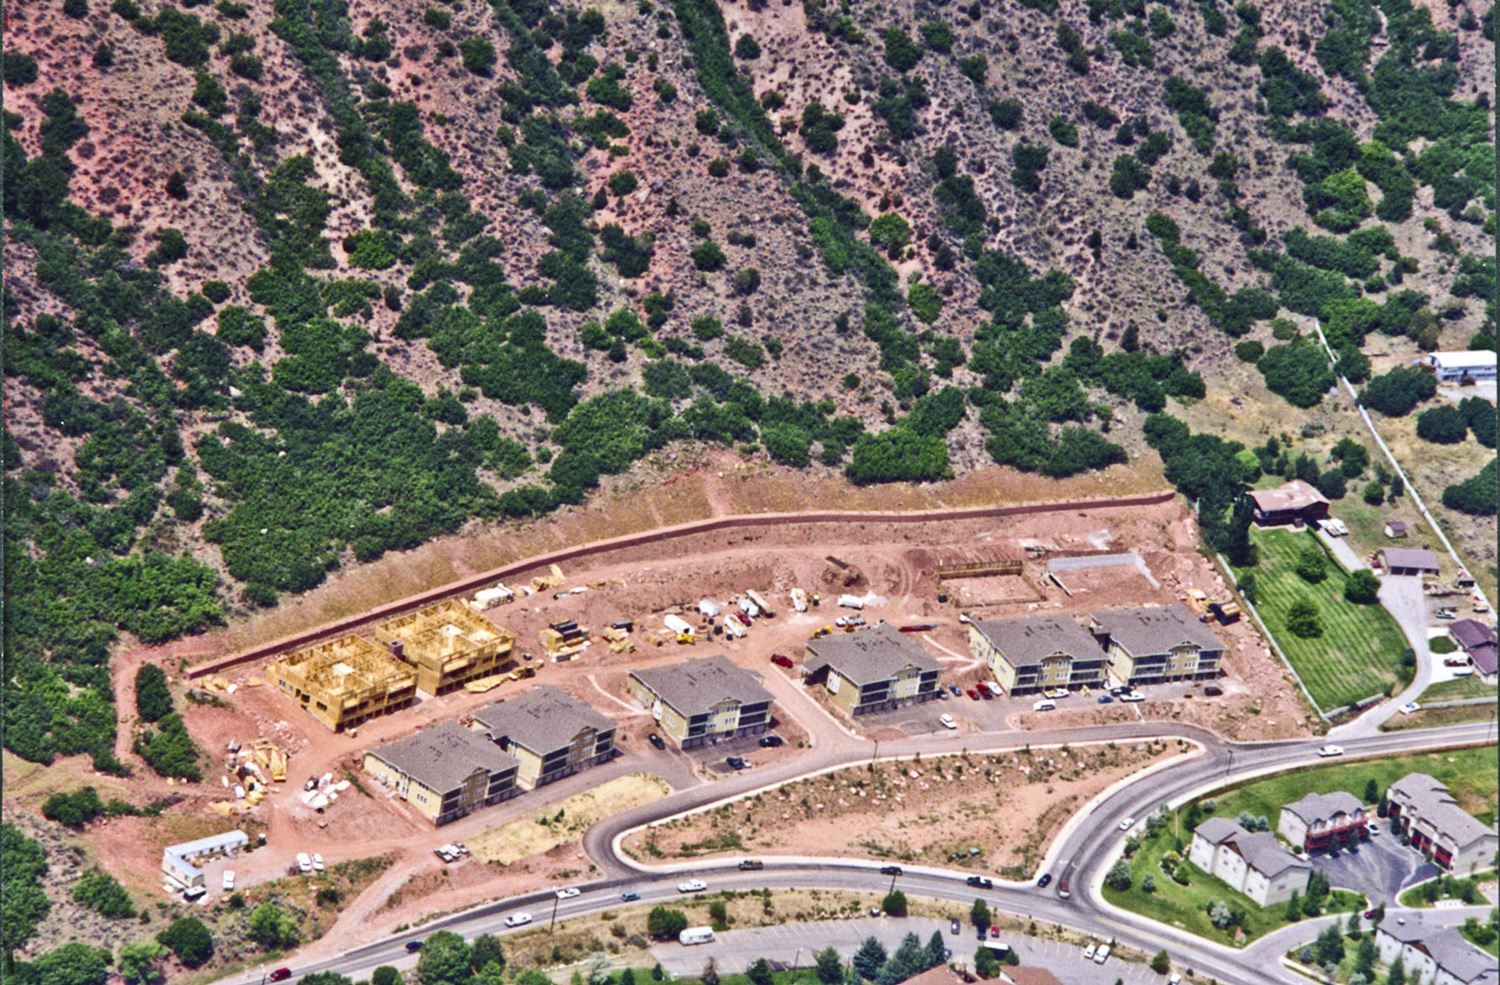 Figure 3 -- This development in west Glenwood Springs constructed a rockfall impact wall above their townhomes to protect against both rockfall and mudslides (debris flows). Photo credit: Jon White for the CGS.